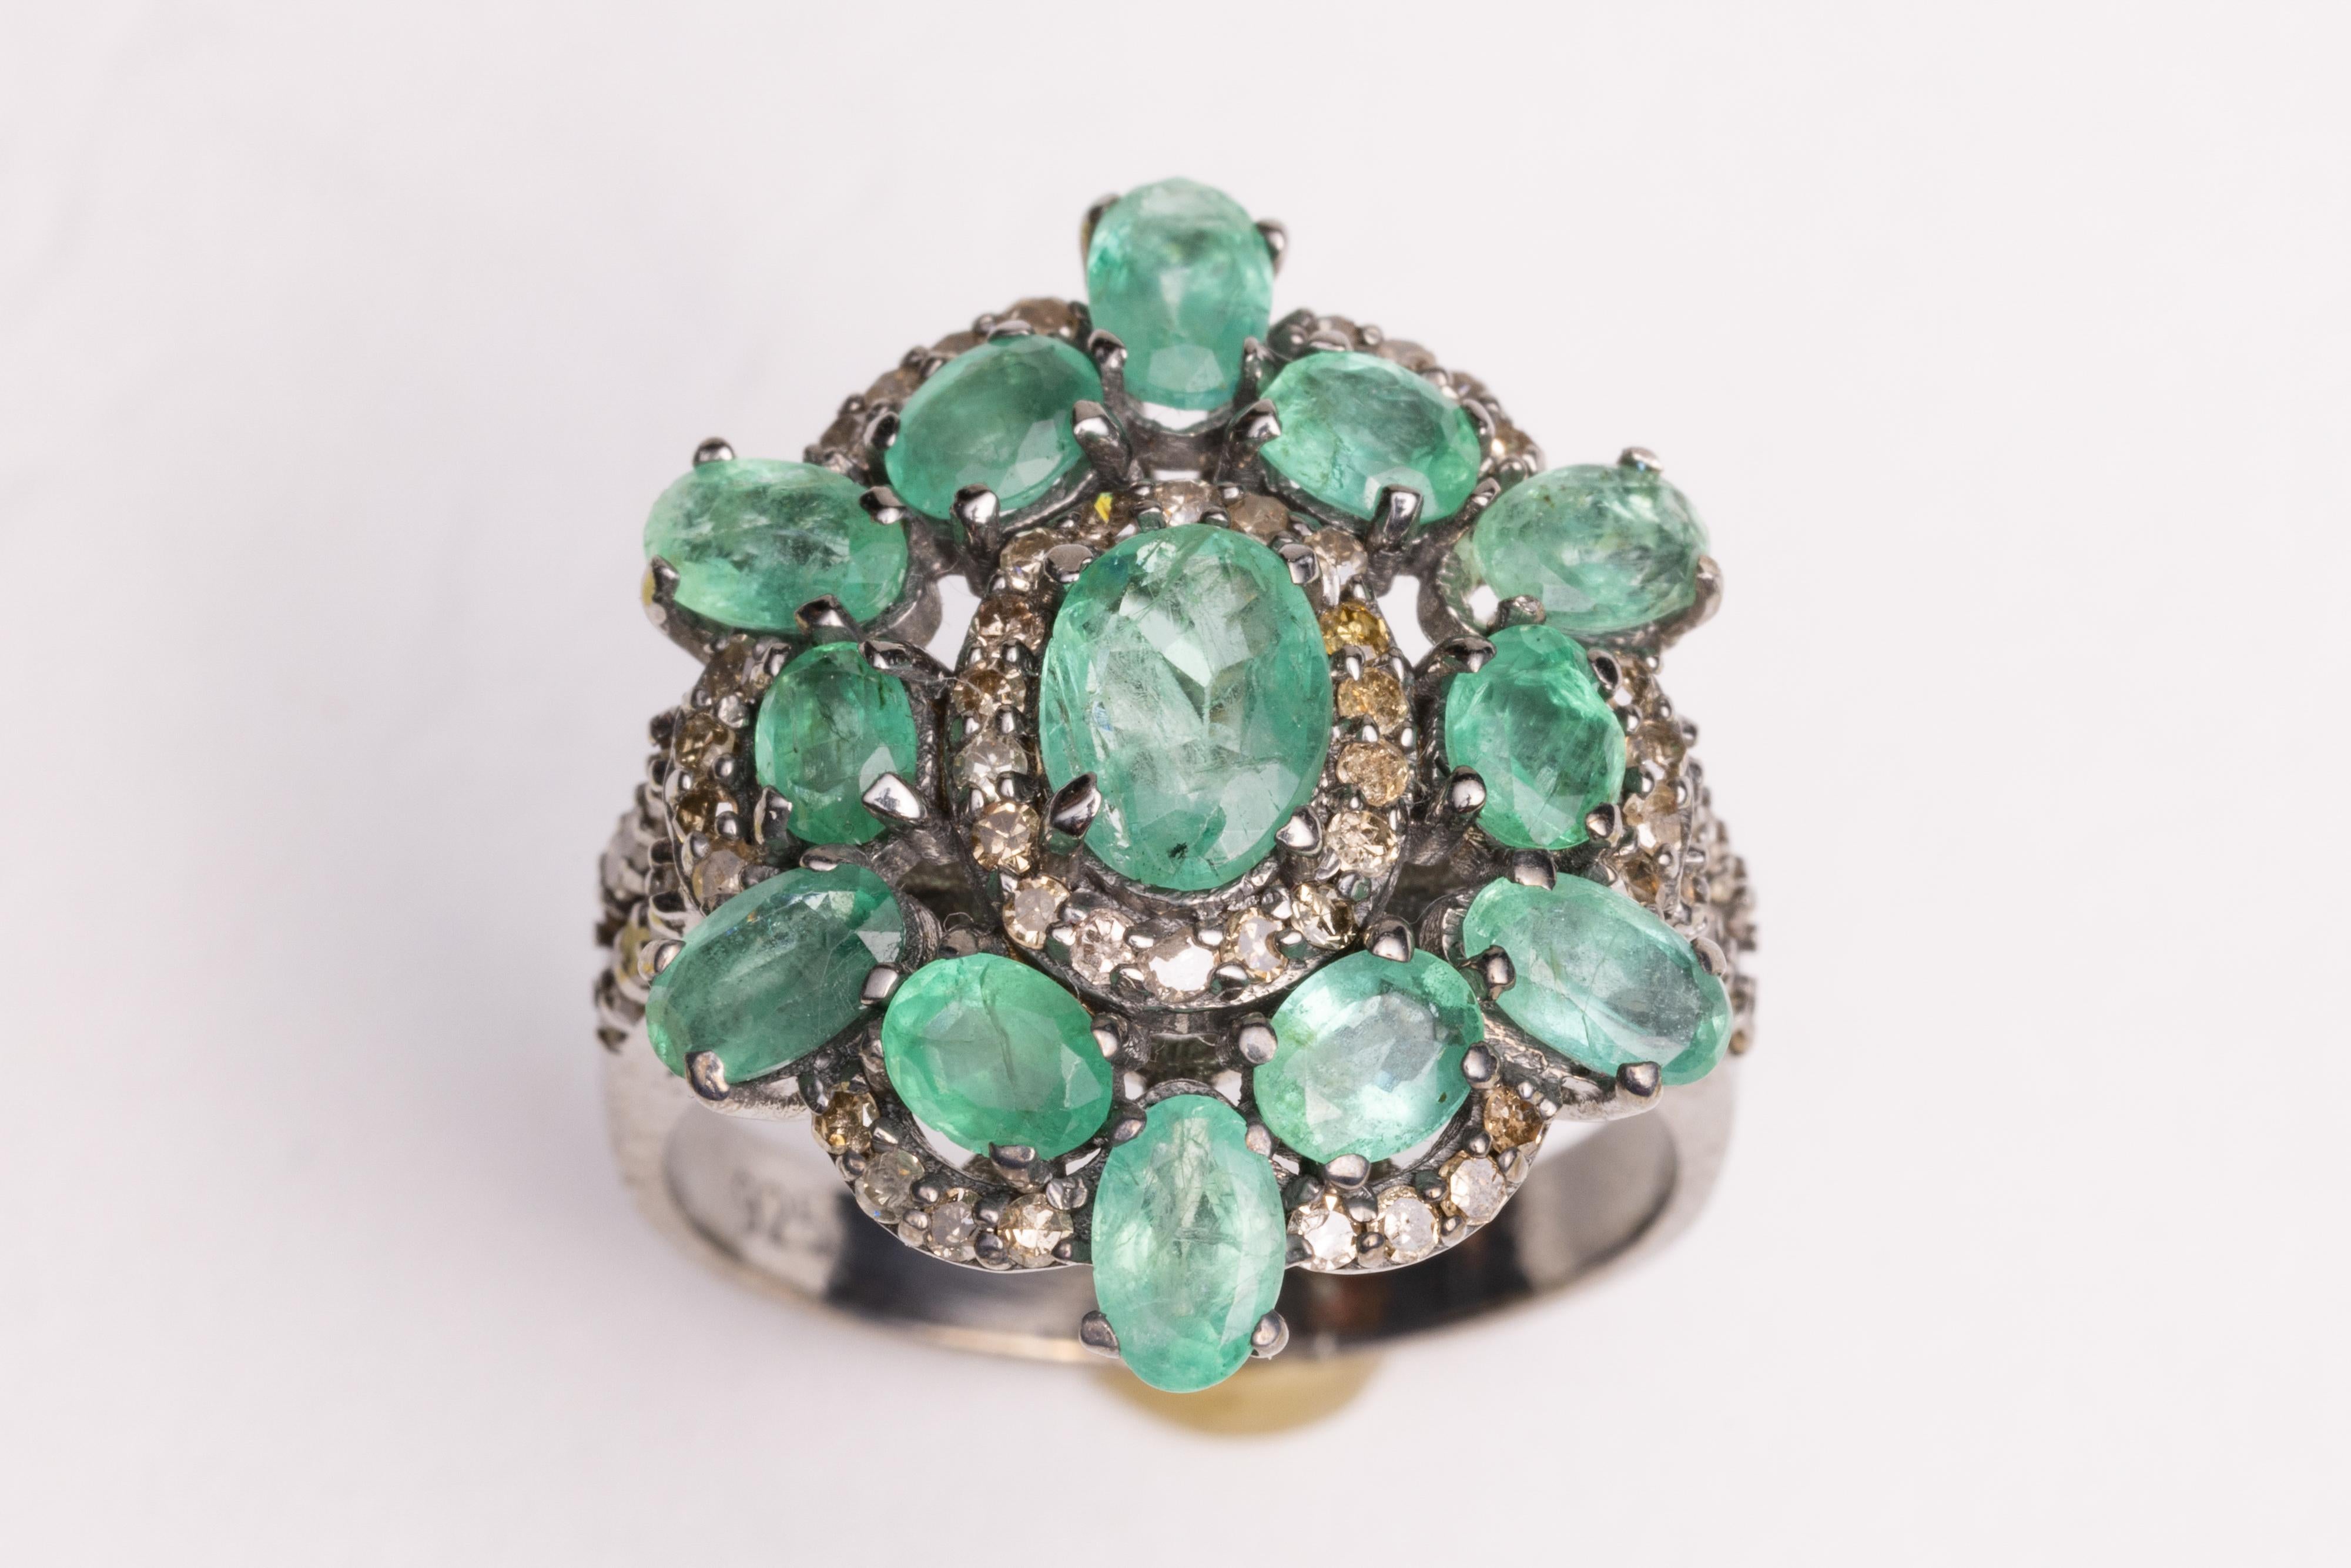 A fabulous cocktail flower ring with a large central oval, faceted emerald with 12 slightly smaller oval, faceted emeralds.  All are surrounded by pave`-set, round and brilliant cut diamonds, and diamonds on the double-band's shoulder as well.  Set